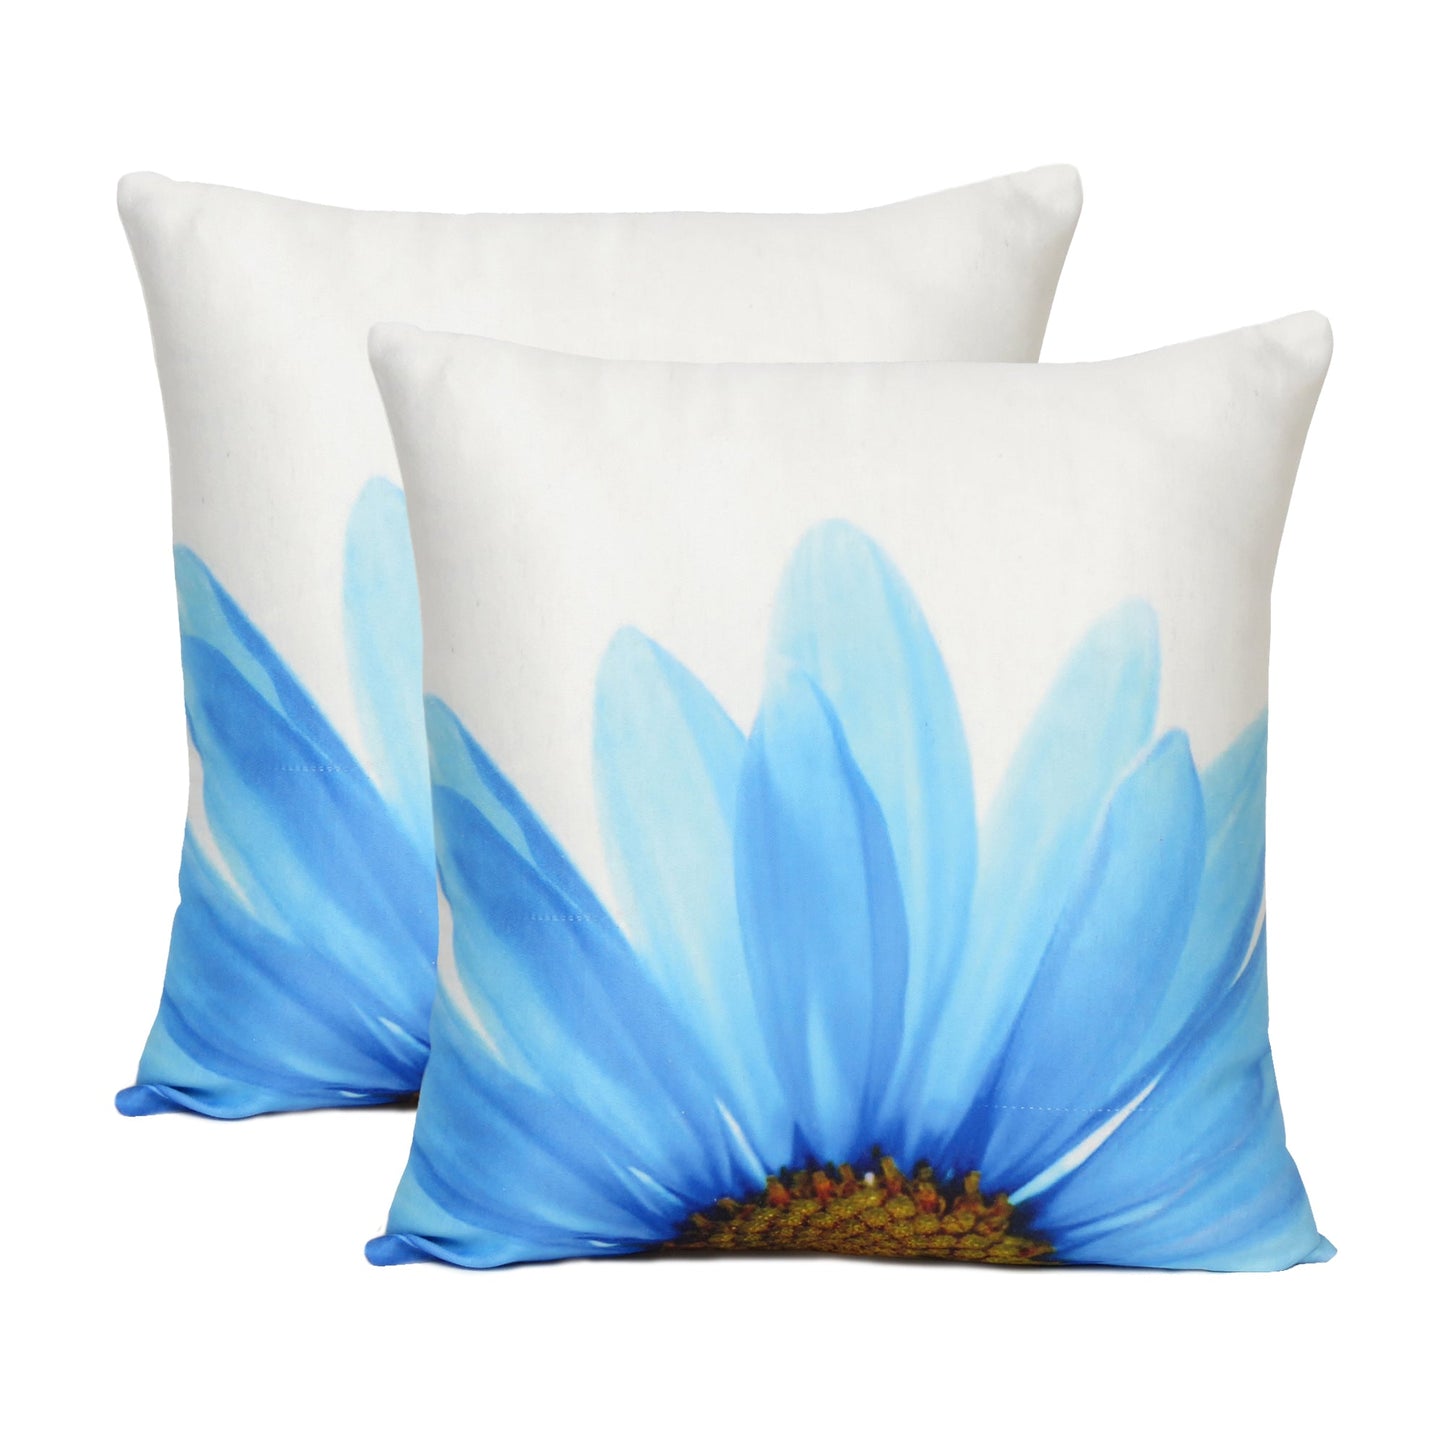 Blue Floral Print Cushion Cover in Set of 2